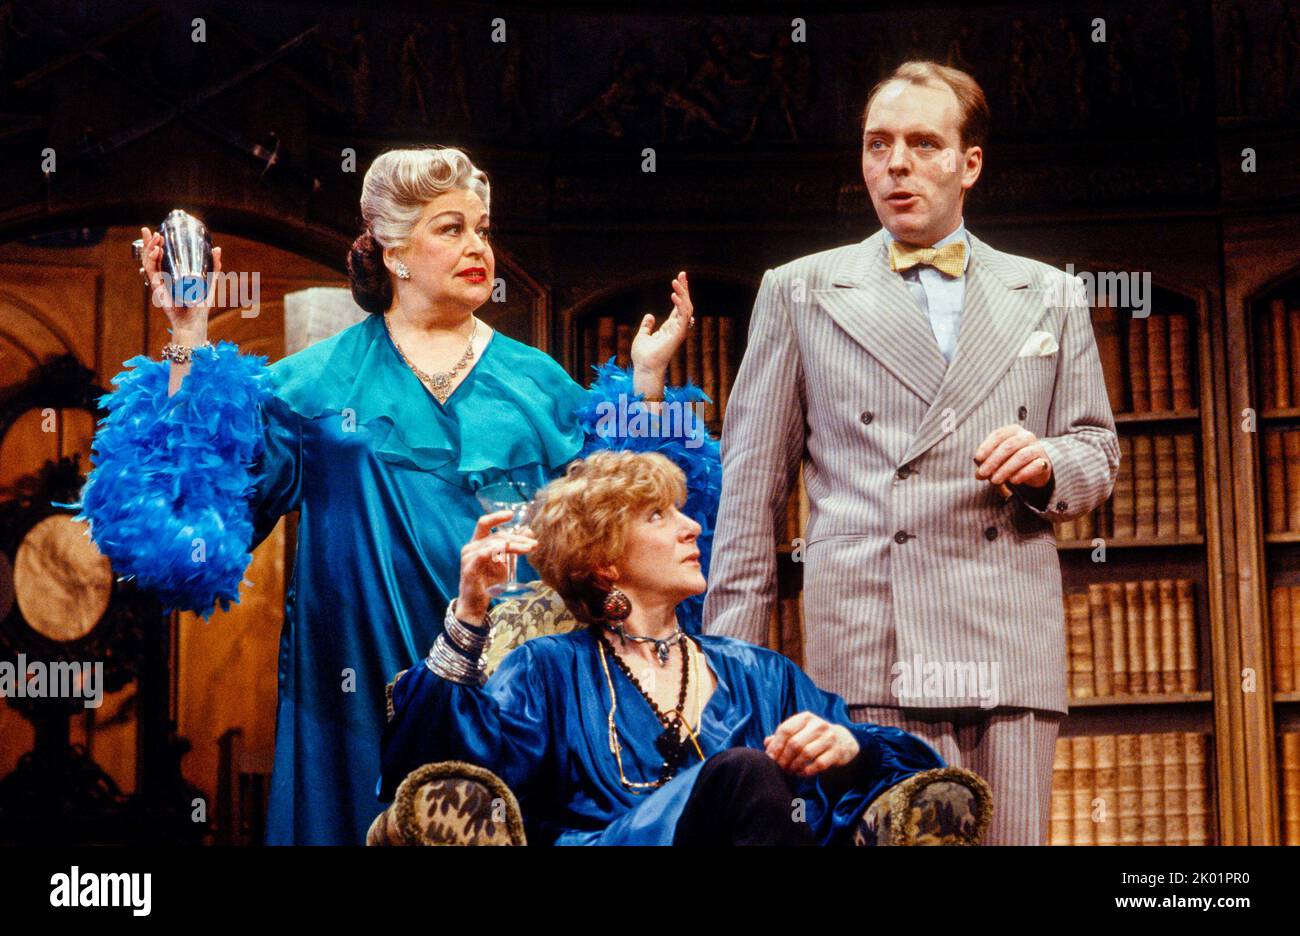 l-r: Margaret Courtenay (Elsa von Grossenkneuten), Sheila Steafel (Bernice Roth), Simon Cadell (Eddie McCuen) in THE MUSICAL COMEDY MURDERS OF 1940 by John Bishop at the Greenwich Theatre, London SE10  28/03/1988  original music: Ted Dimons  design: Peter Rice  lighting: Mick Hughes  director: Peter Farago Stock Photo